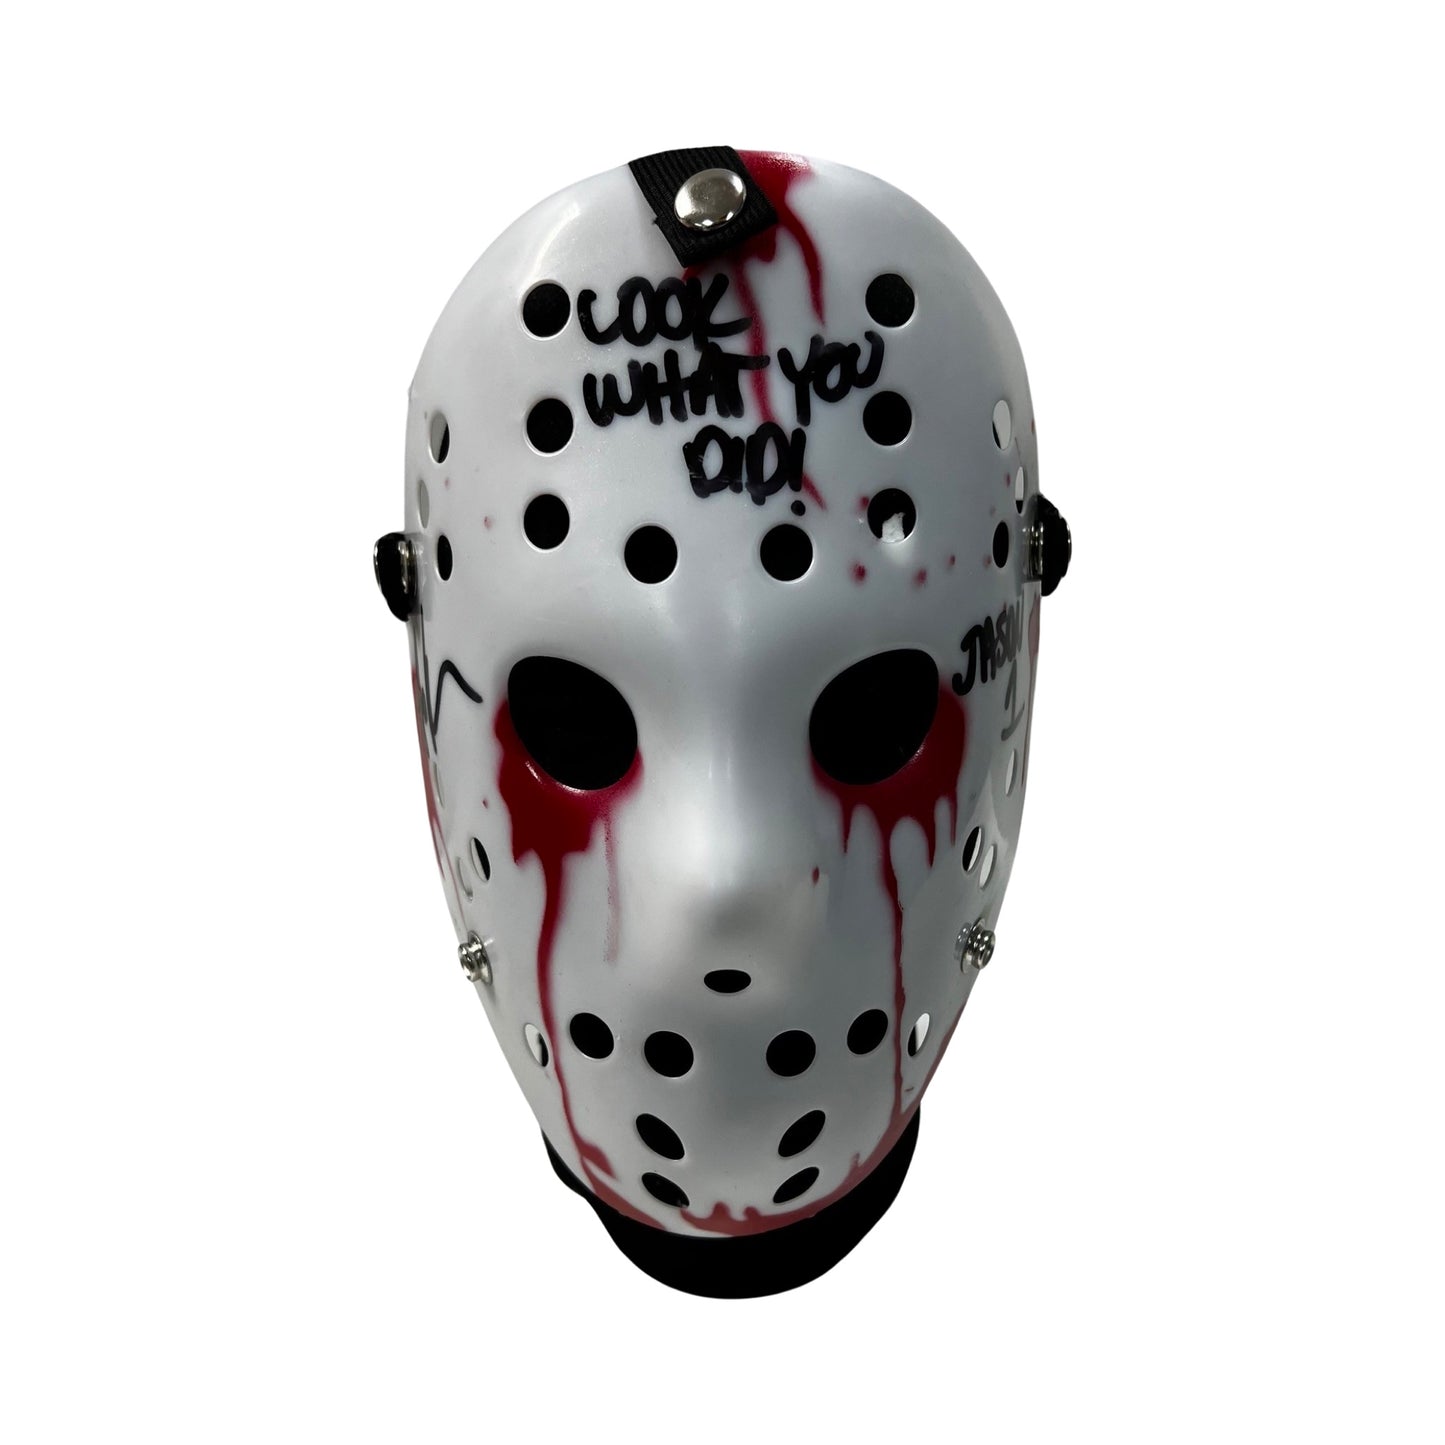 Ari Lehman Autographed Jason Voorhees Friday the 13th White Bloody Mask “Look What You Did! Jason 1” Inscriptions Steiner CX